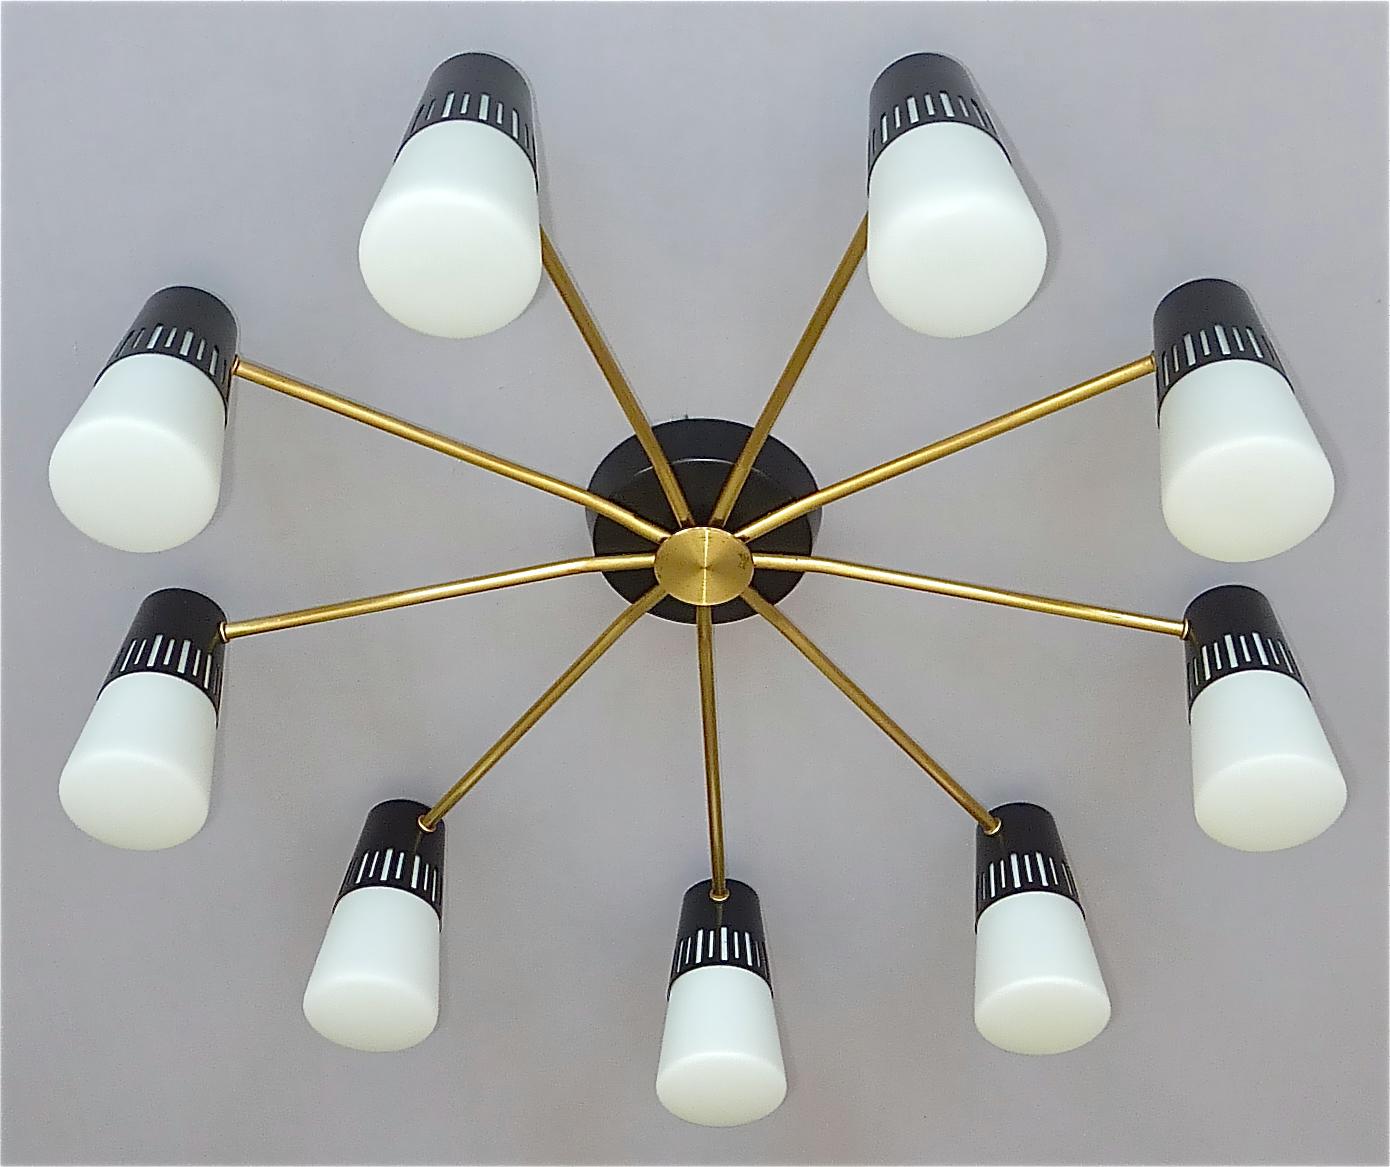 Large midcentury 9-light sputnik flush mount or ceiling chandelier with attribution to Stilnovo or Arteluce, Italy circa 1950s and very in the style of Mathieu Mategot. The stylish patinated brass ceiling lamp with black enameled metal base and